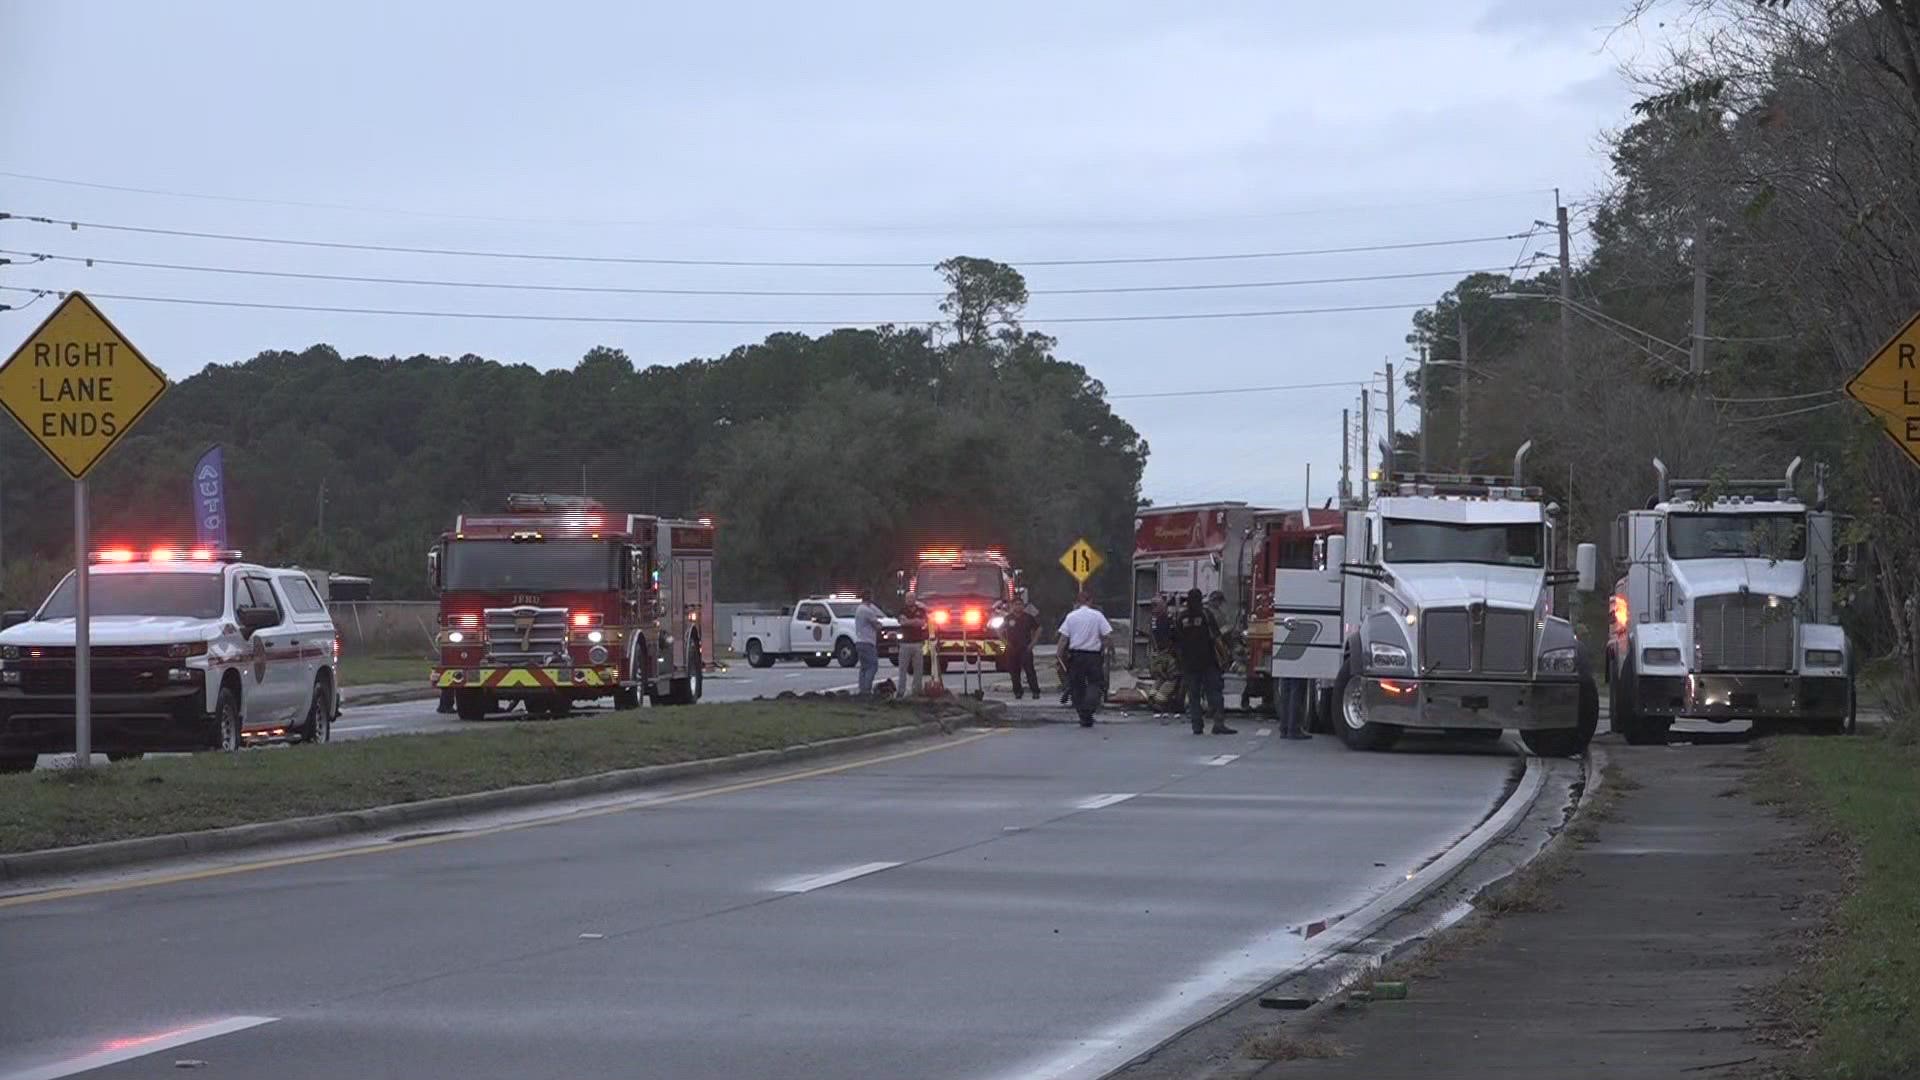 Three firefighters with the Jacksonville Fire and Rescue Department were taken to the hospital after a truck overturned due to weather-related conditions Sunday.